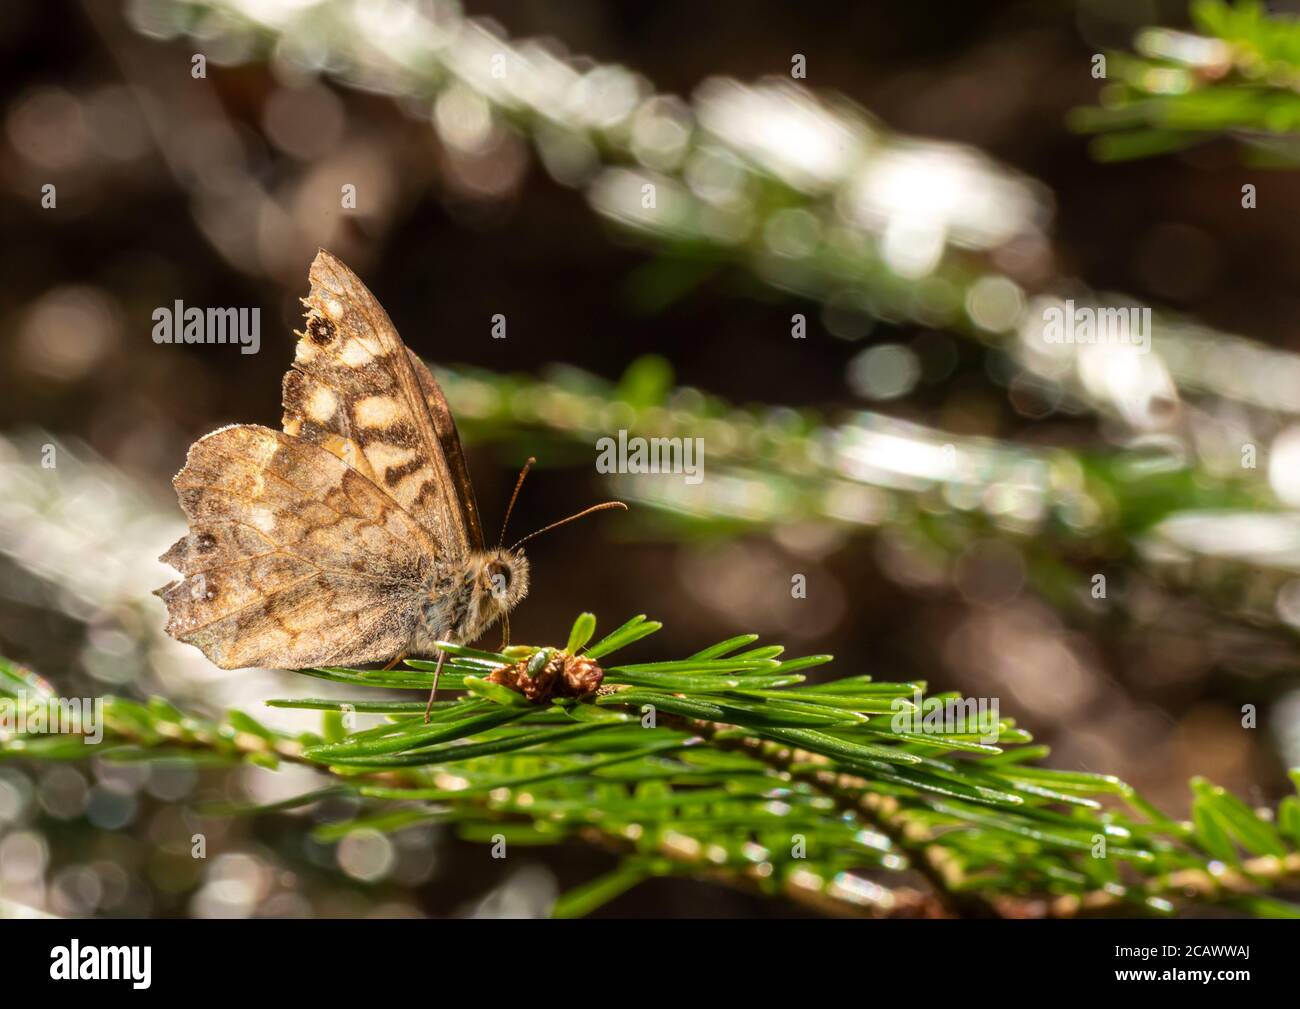 Small brown butterfly sits on a pine branch against a blurred brown background with copy space Stock Photo